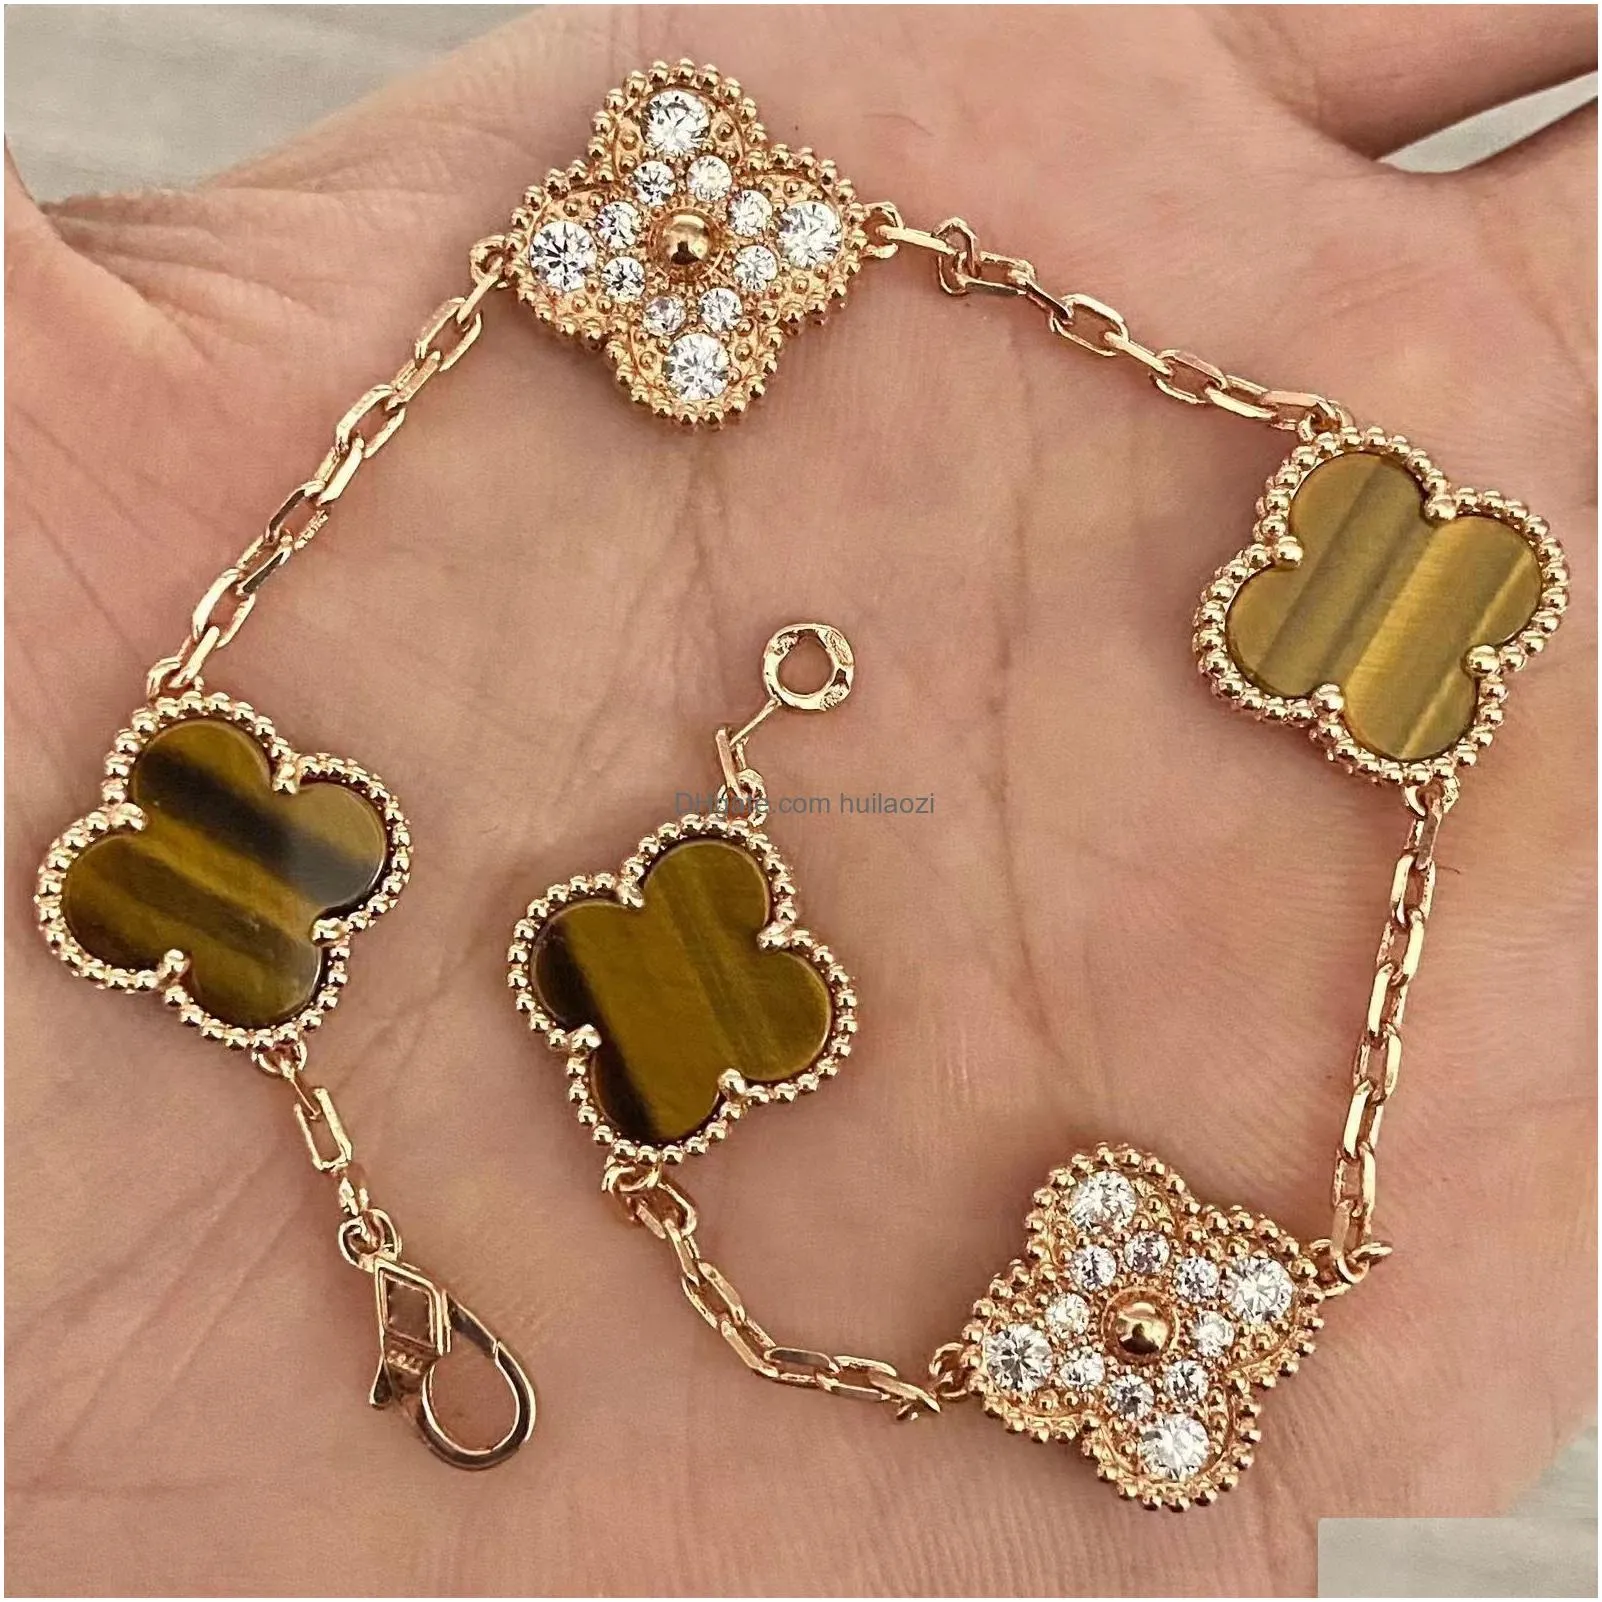 18k gold four-leaf clover charm bracelet with diamond accents - shell motif unisex fashion jewelry perfect for valentines day